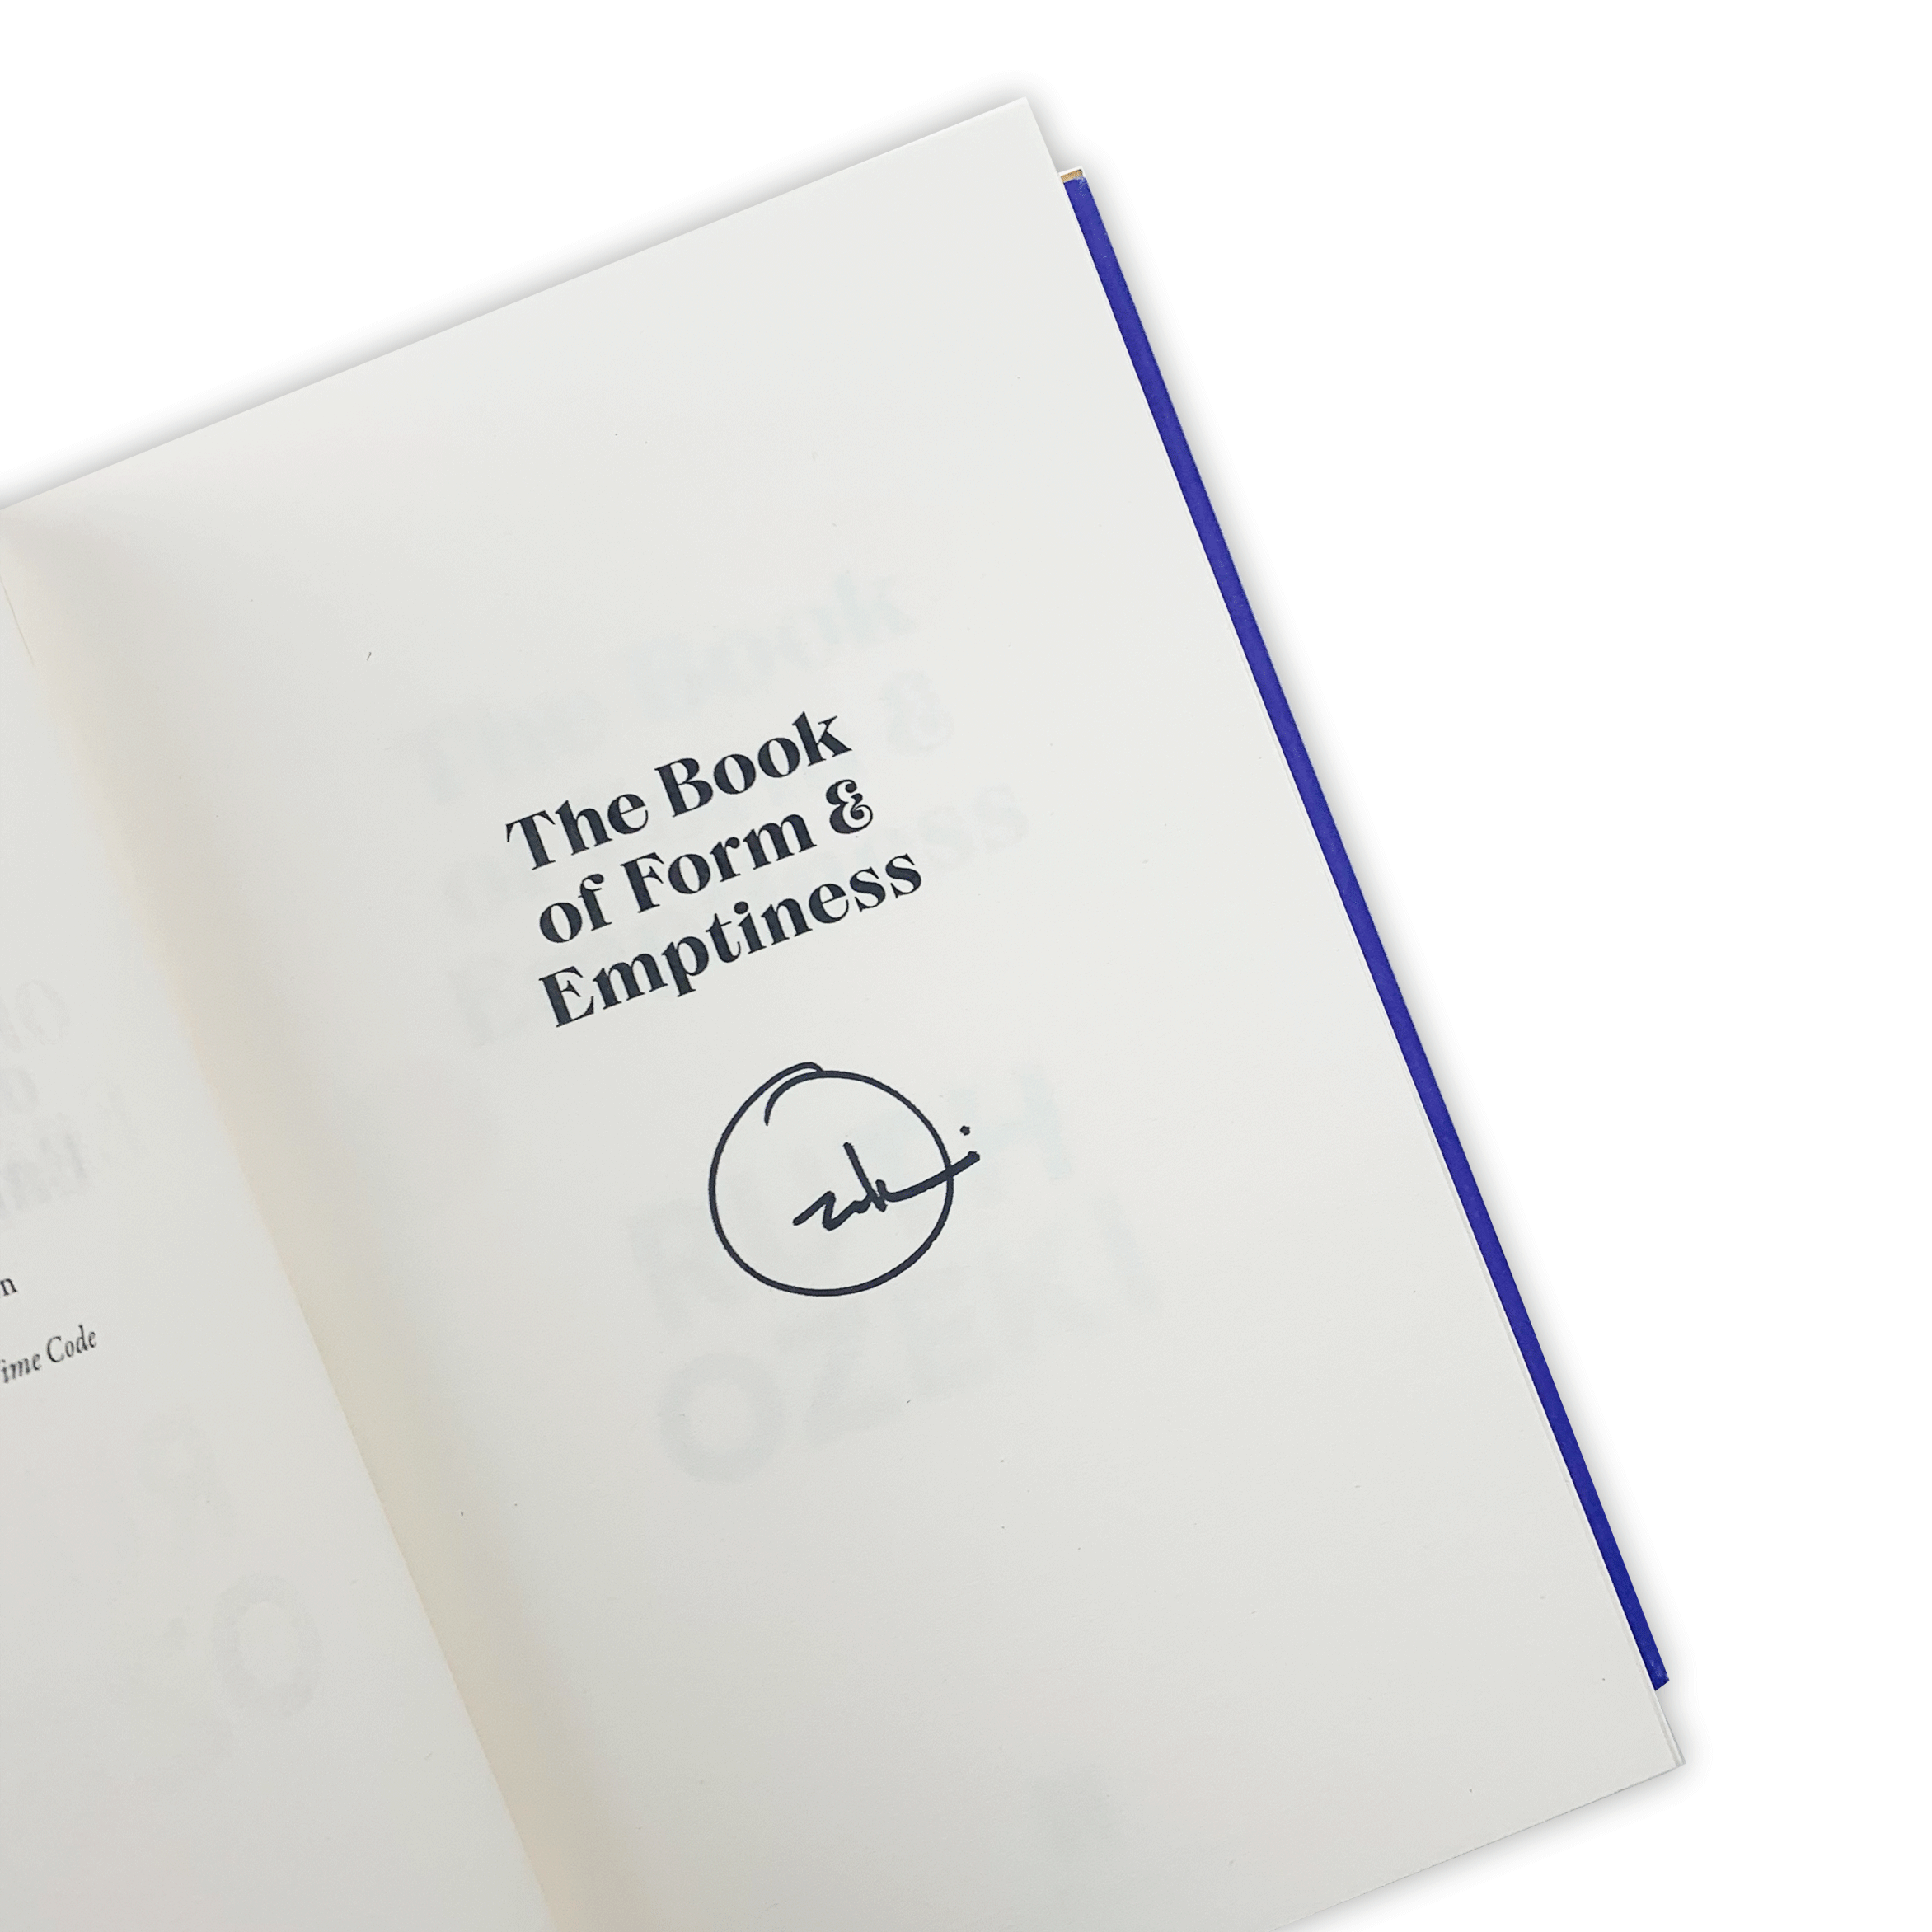 the book of form and emptiness review